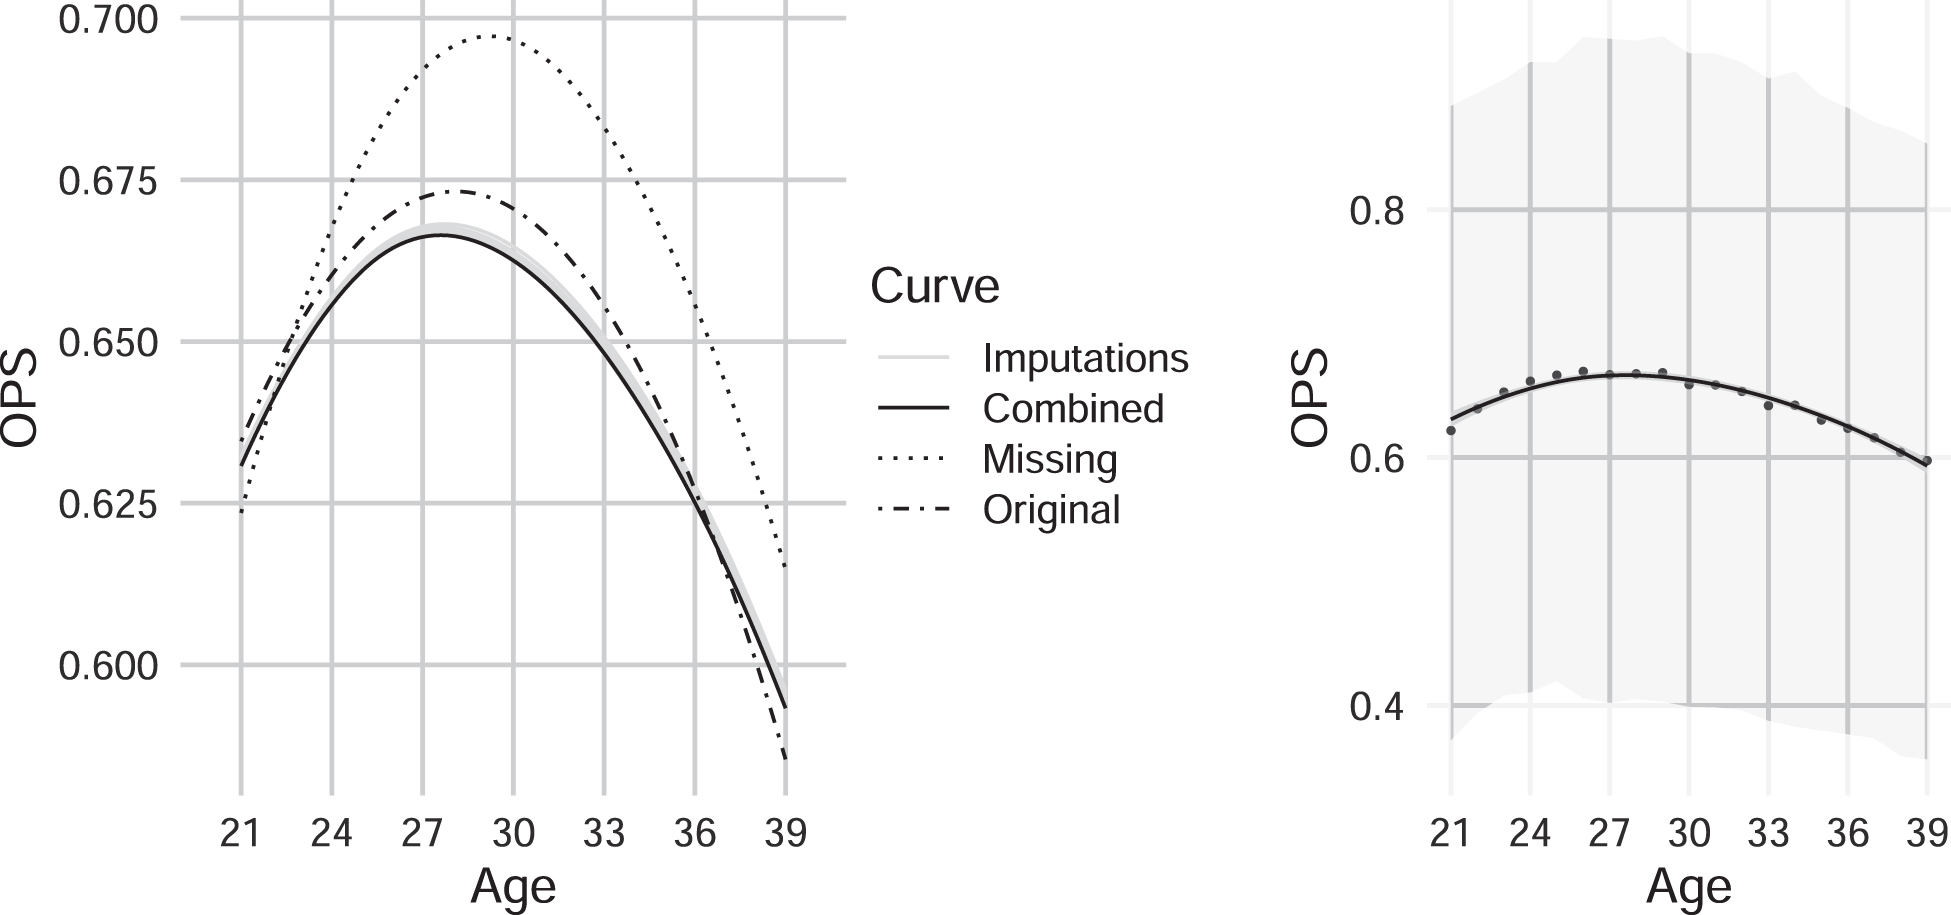 Left: Comparison of the average OPS aging curves constructed with the fully observed data, only surviving players, and imputation. Right: Combined imputed curve with 95% confidence intervals obtained from Rubin’s rules. Results shown here are for the dropout case of players having OPS average from age 21 to 25 below 0.55.